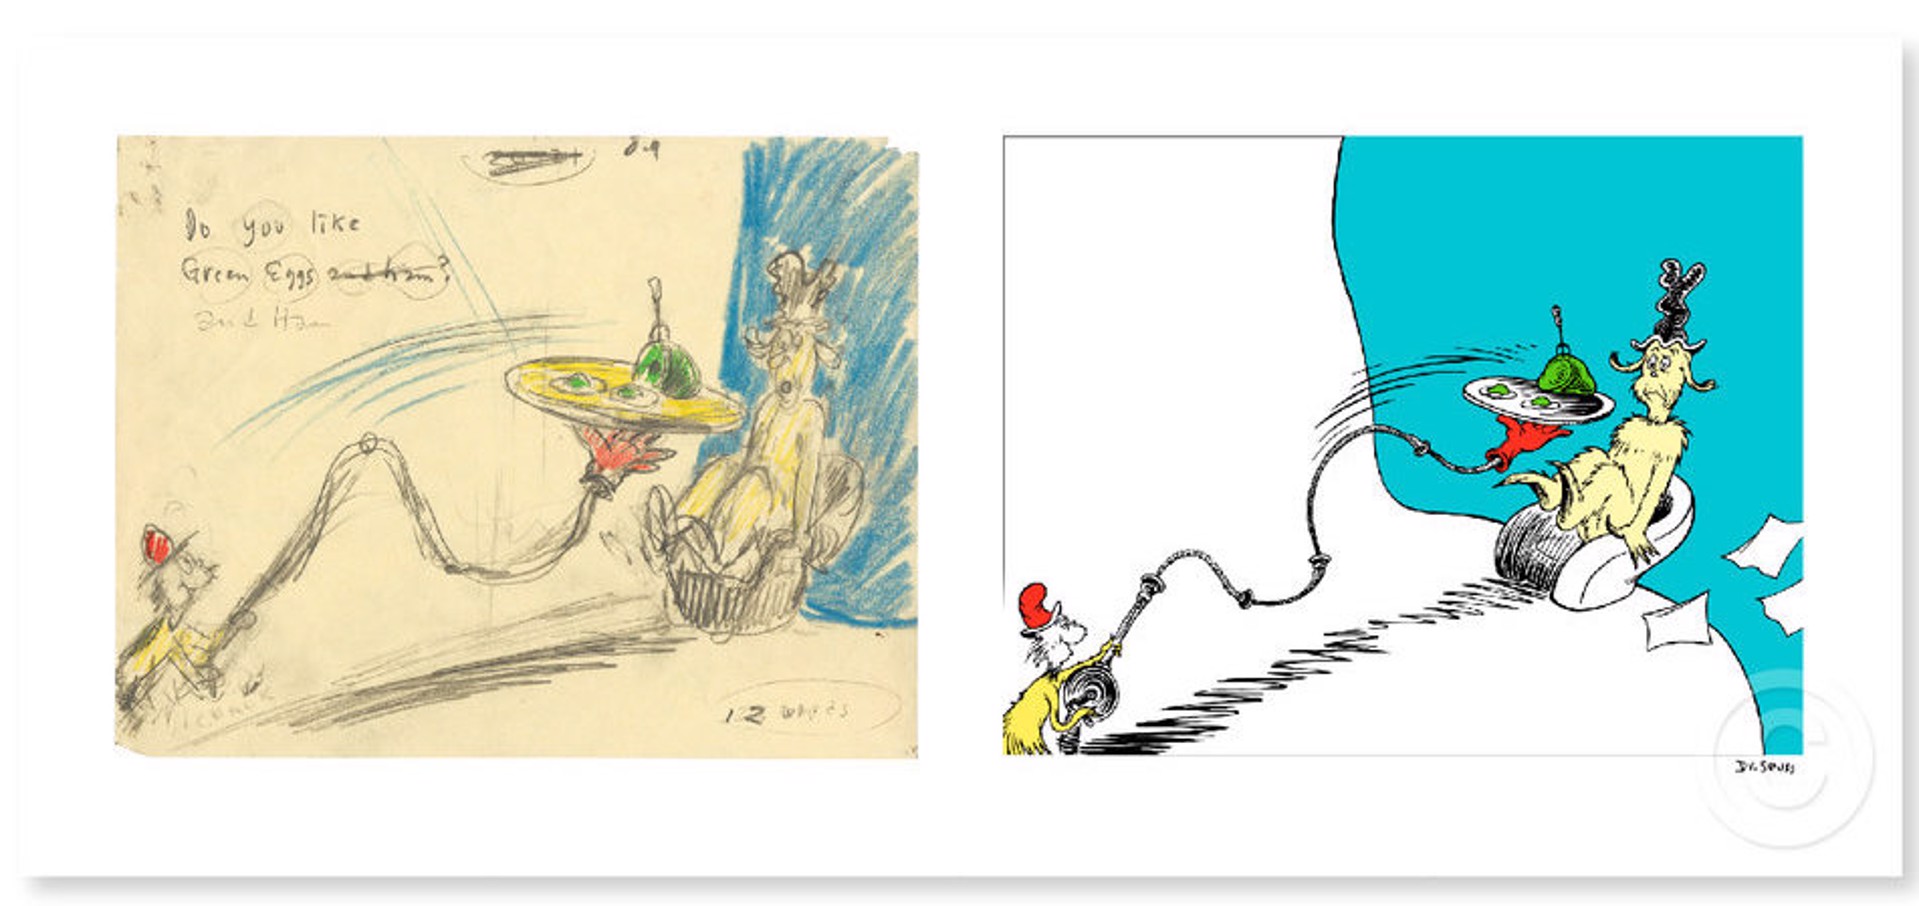 Do You Like Green Eggs And Ham? (Diptych) by Dr. Seuss